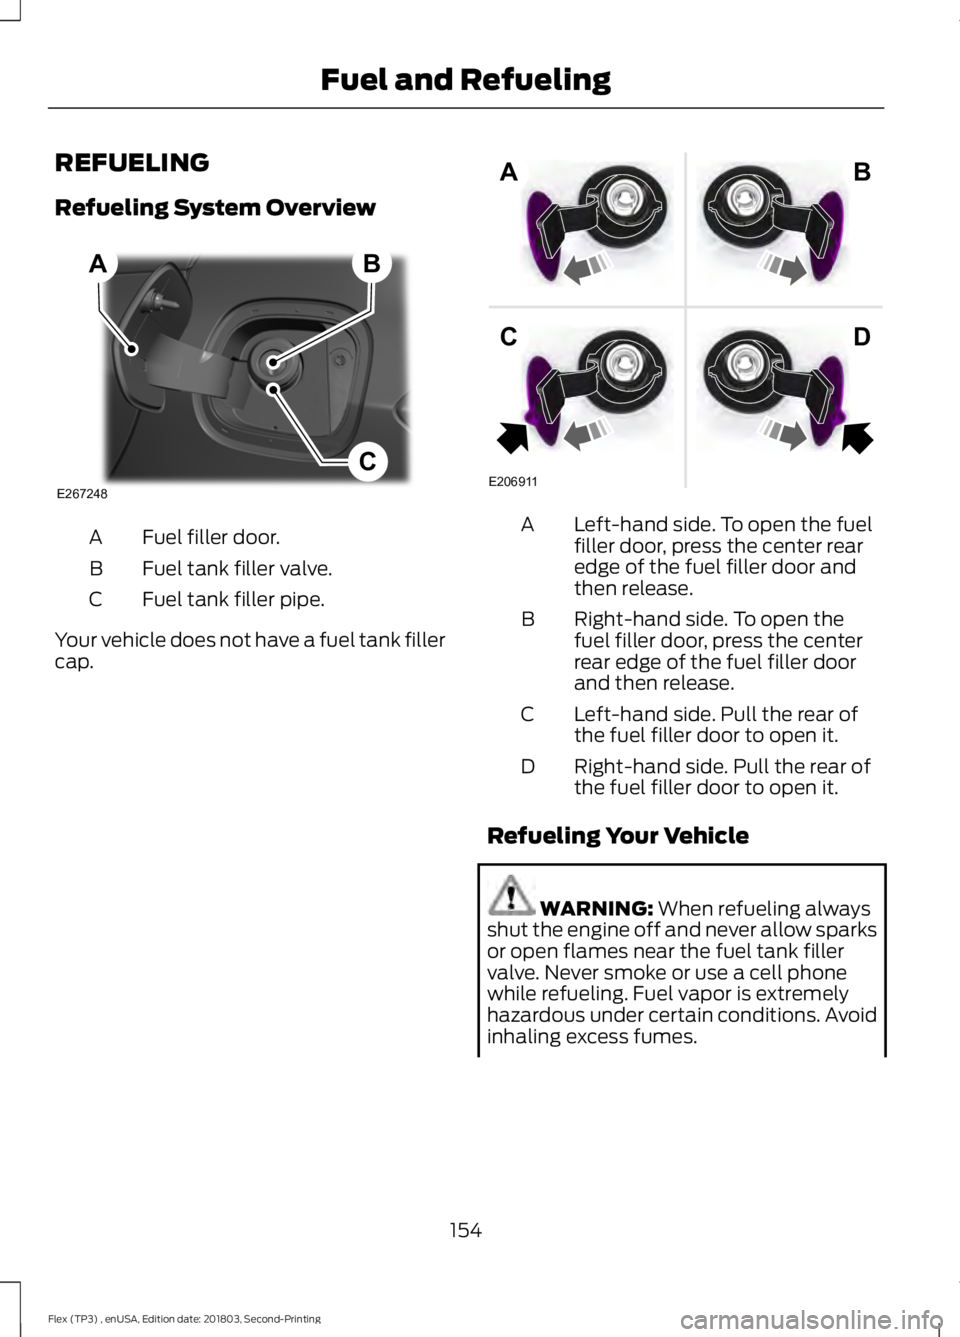 FORD FLEX 2019  Owners Manual REFUELING
Refueling System Overview
Fuel filler door.
A
Fuel tank filler valve.
B
Fuel tank filler pipe.
C
Your vehicle does not have a fuel tank filler
cap. Left-hand side. To open the fuel
filler do